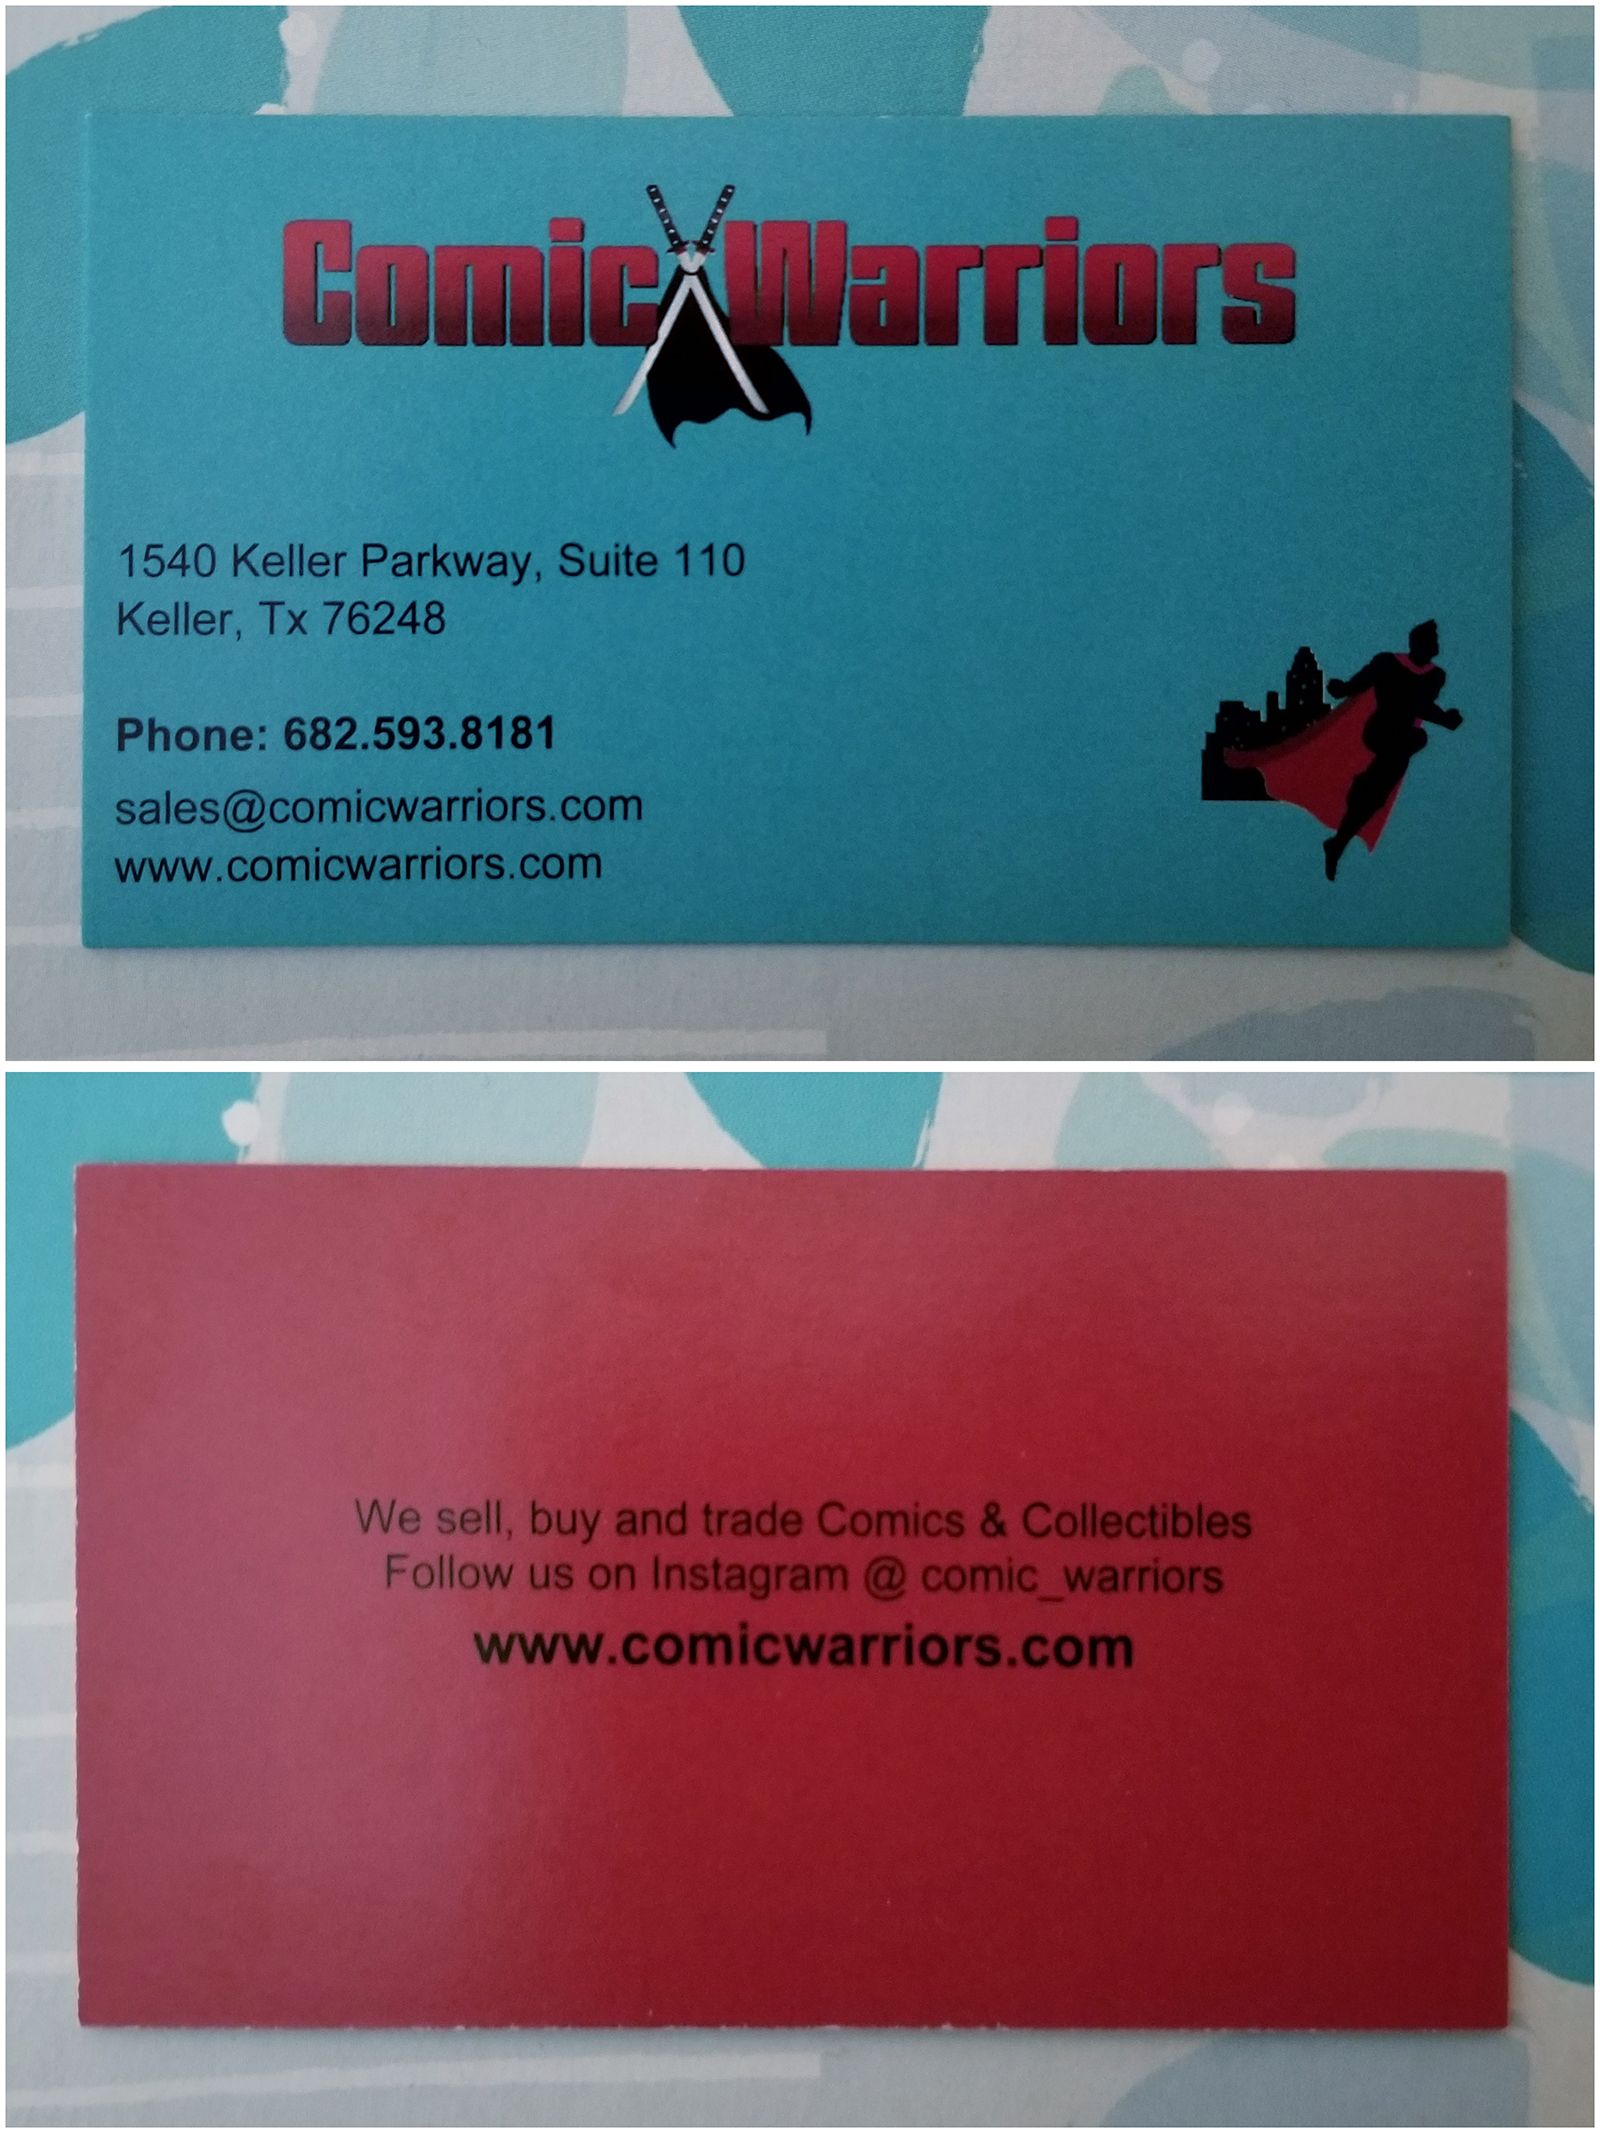 Business card for Comic Warriors